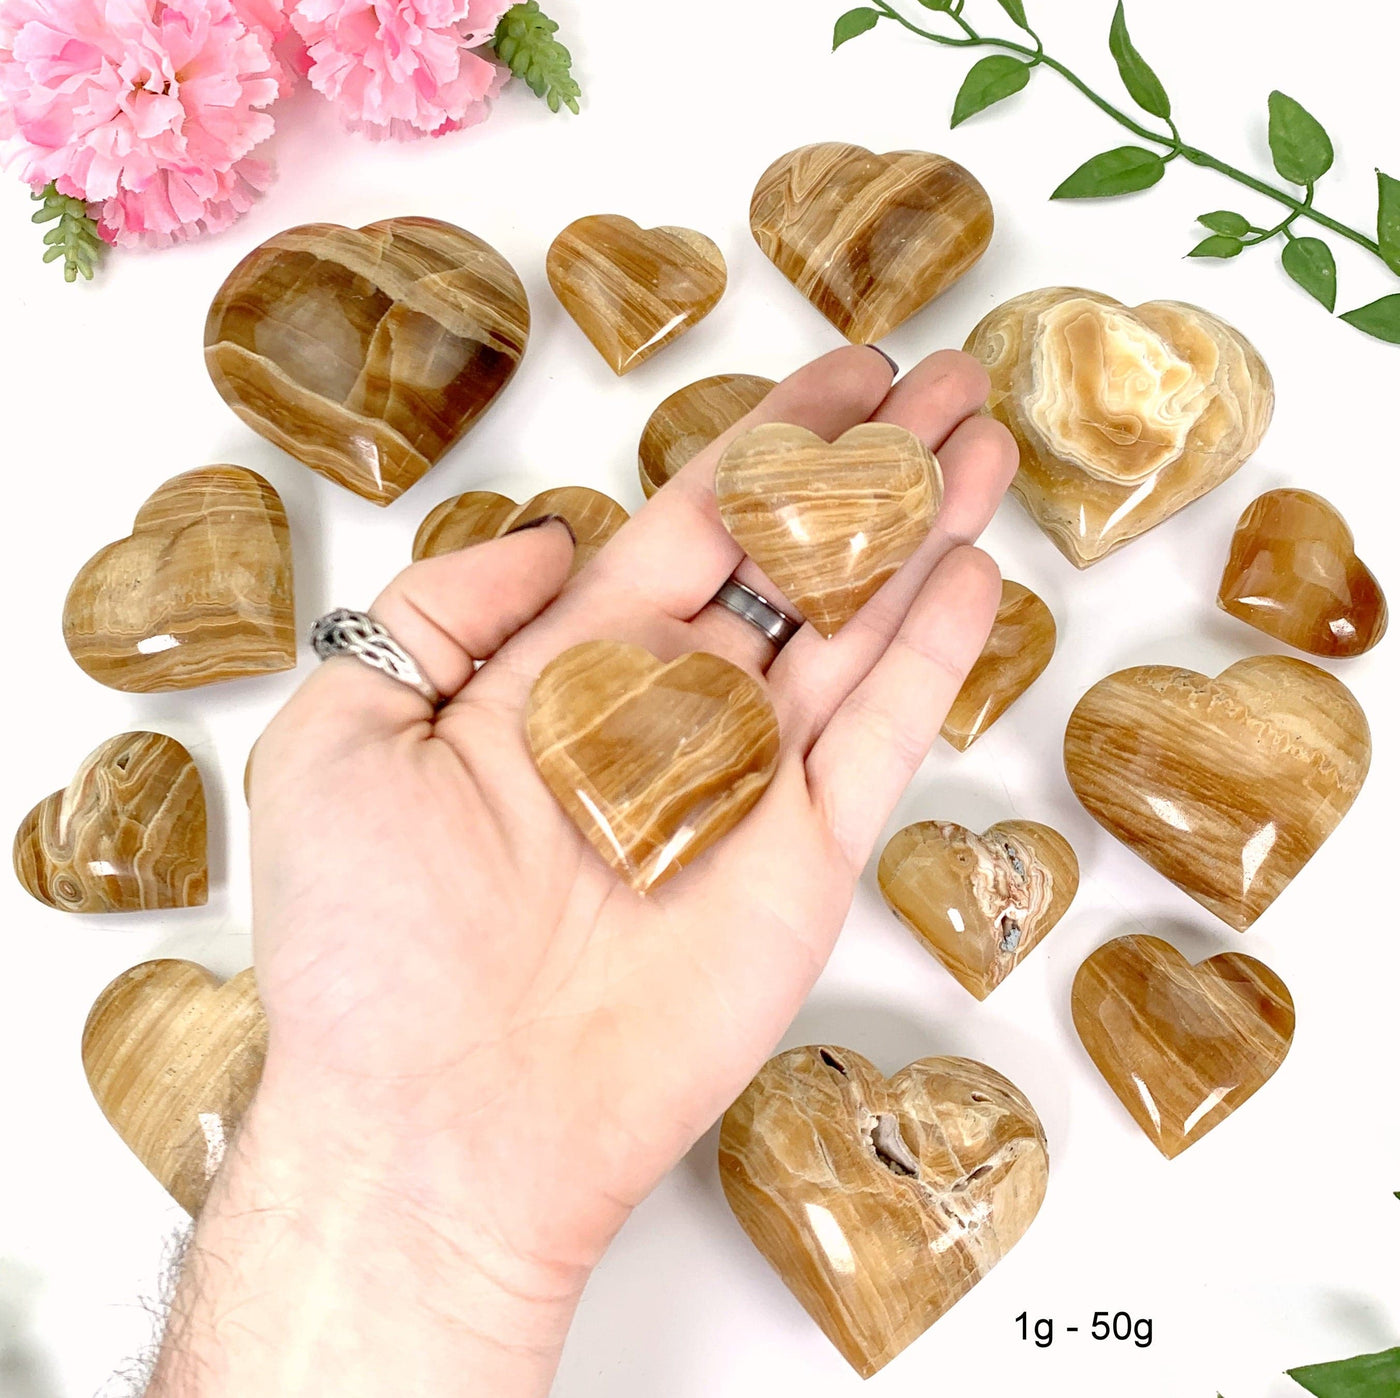 2 1gram - 50 gram hearts in hand with a white background